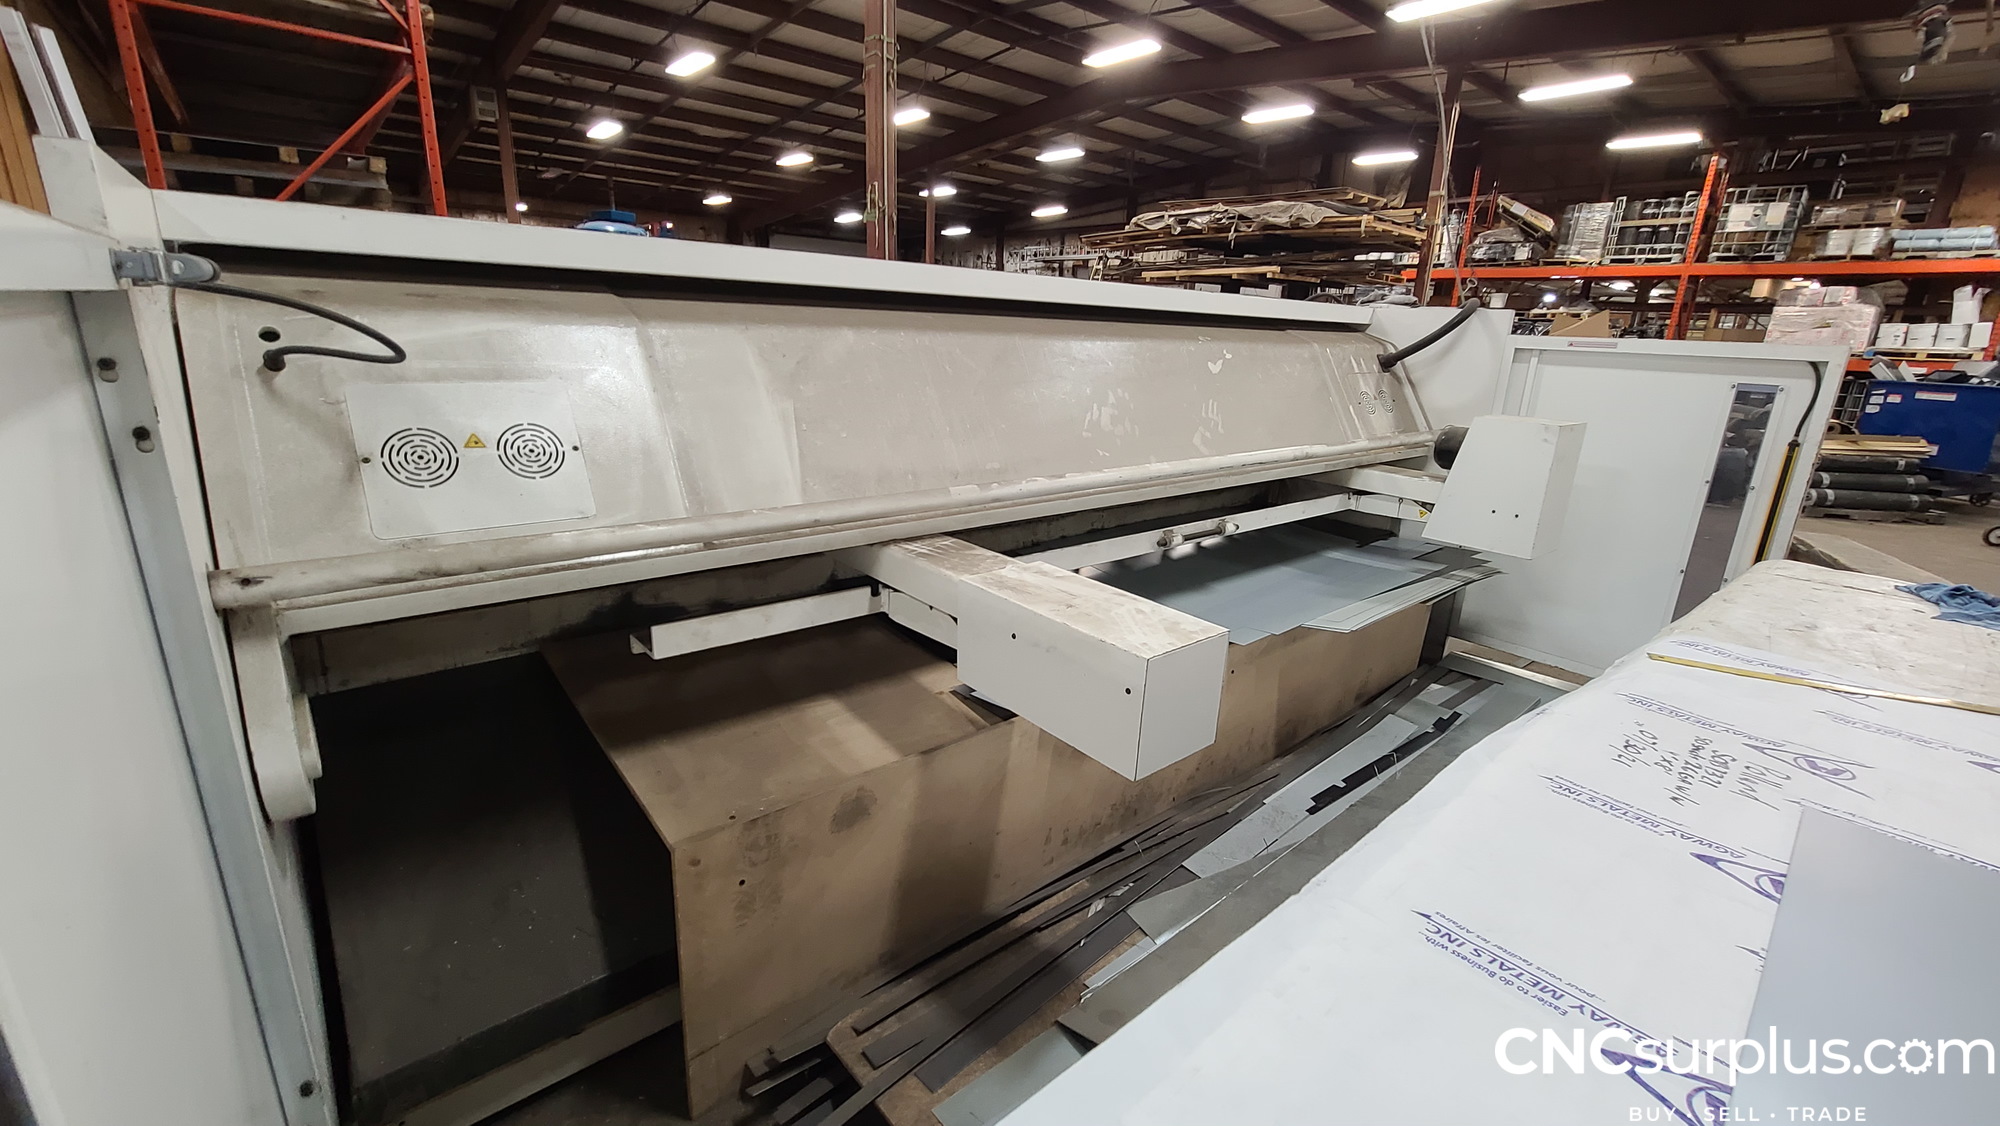 2014 BAYKAL HGL 3766 Power Squaring Shears (Inch) | CNCsurplus, A Div. of Comtex Leasing Corp.